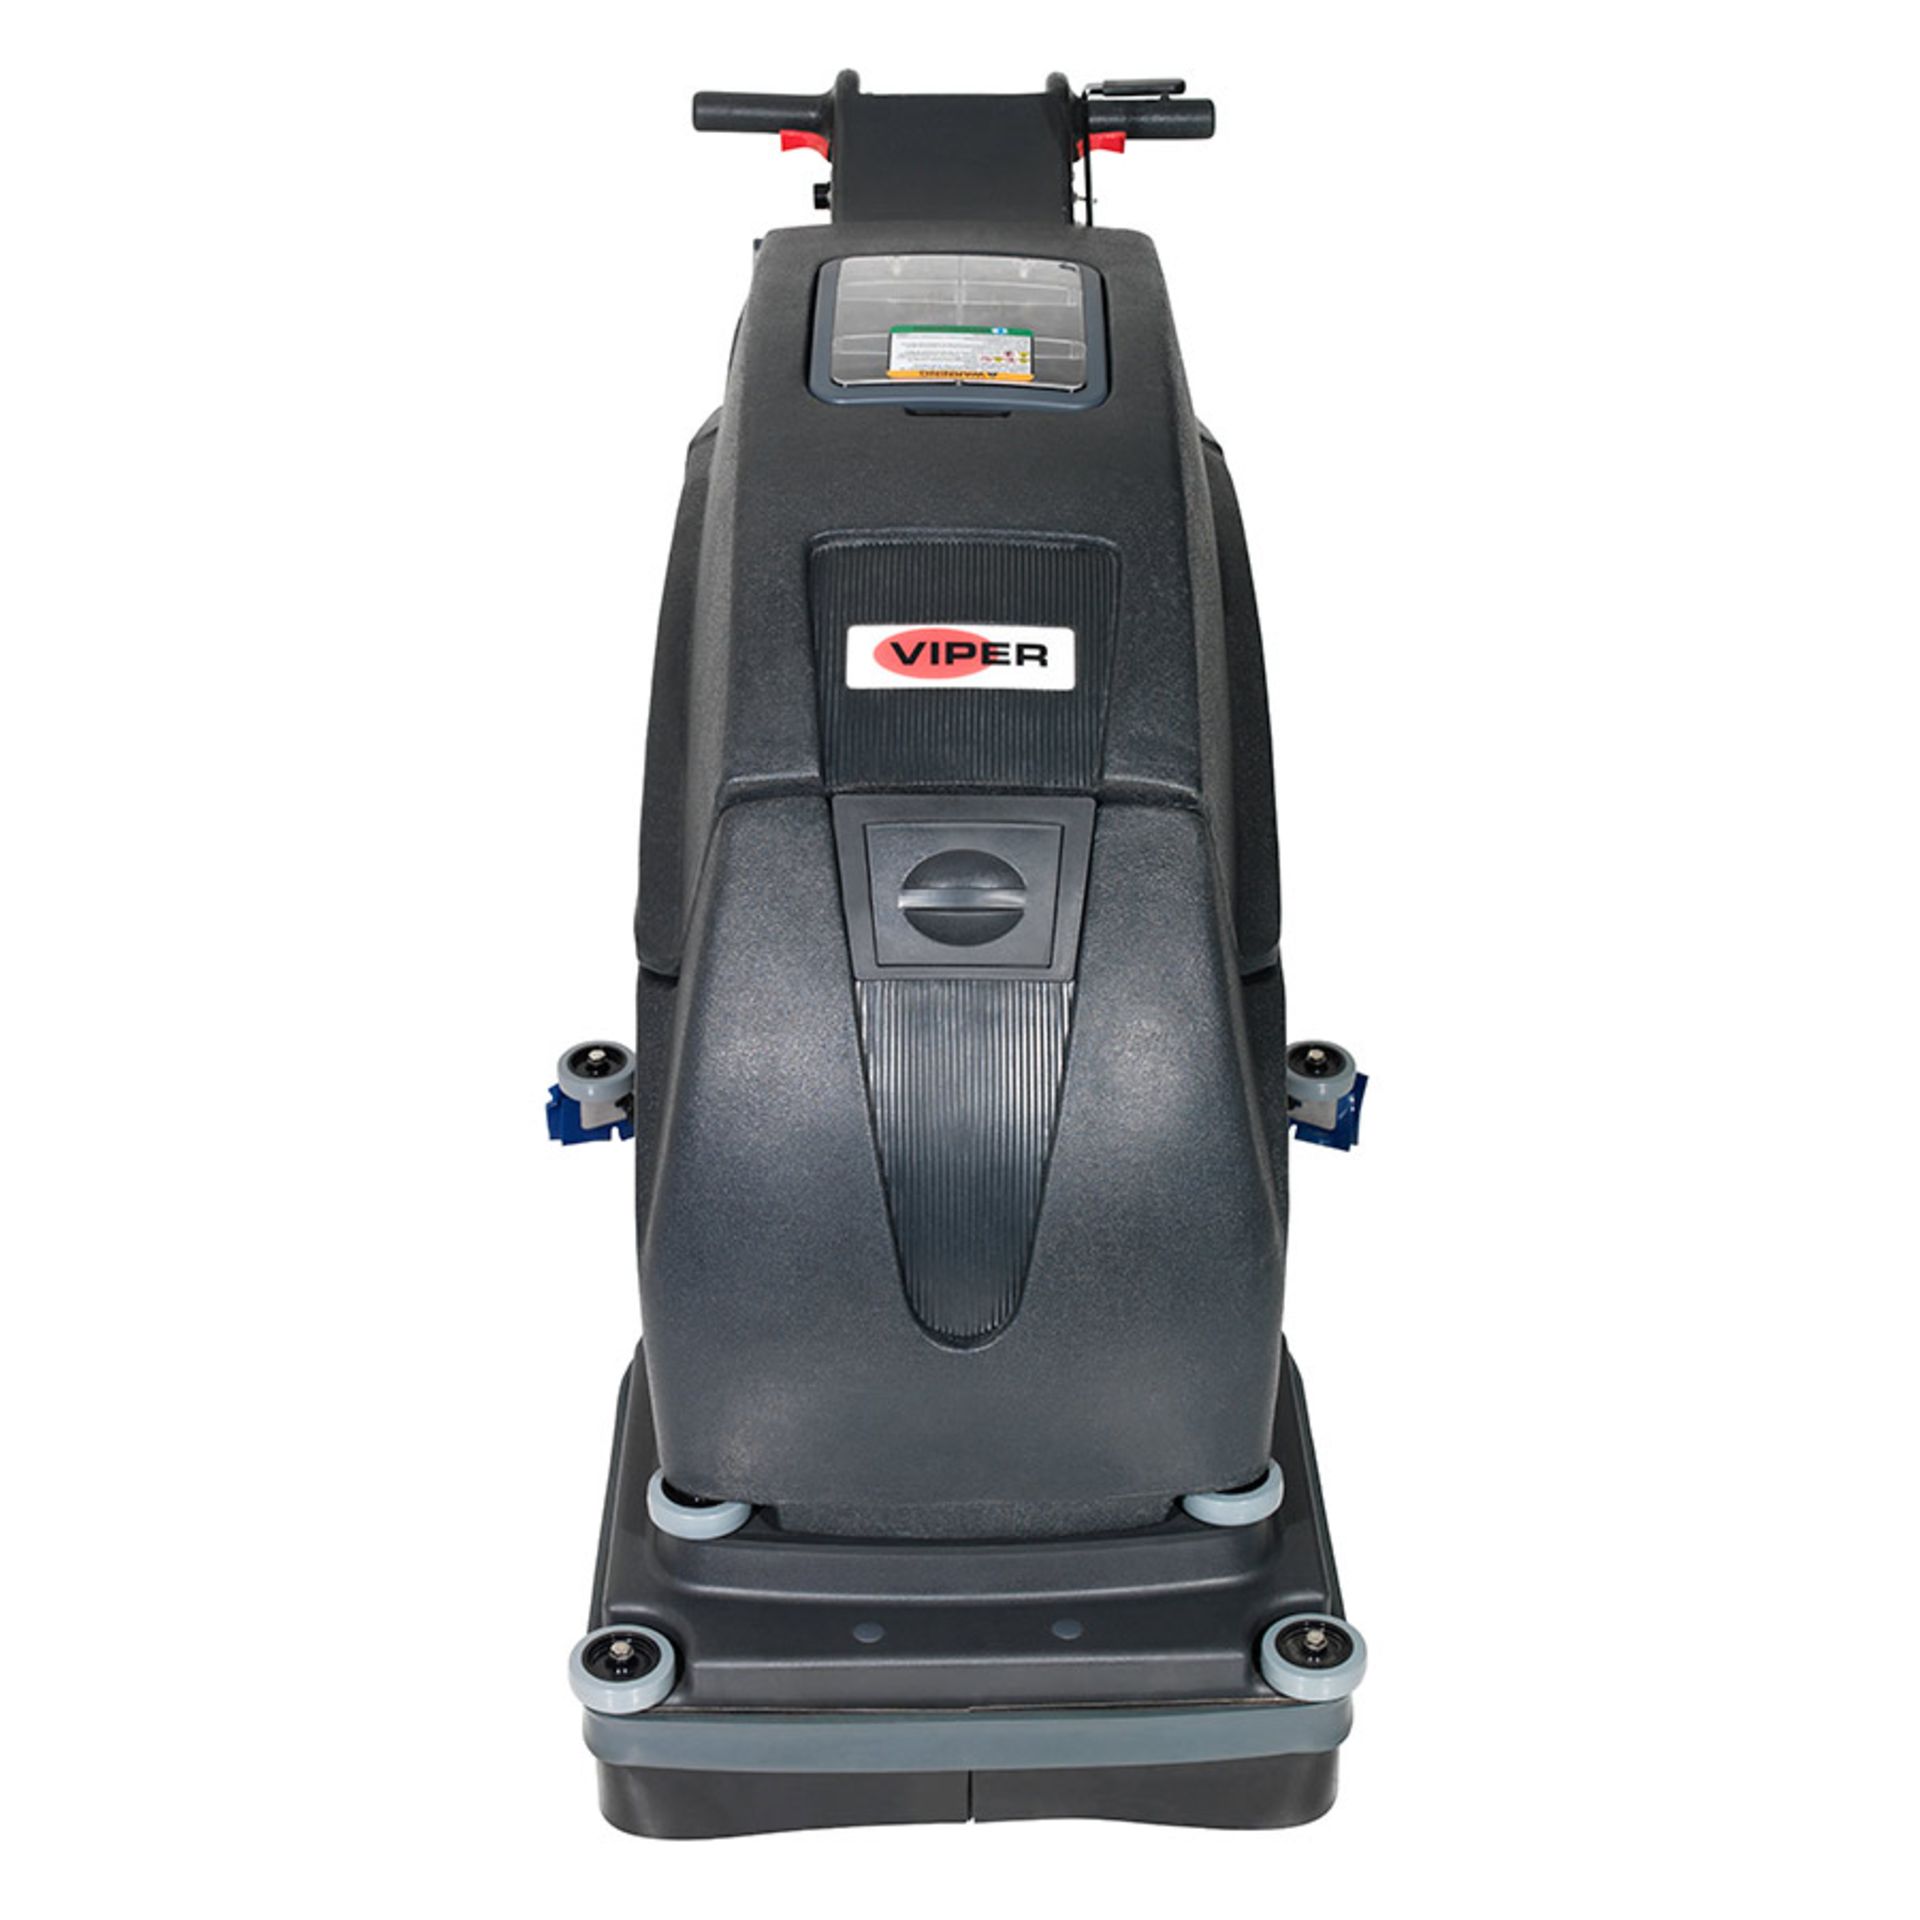 Viper Fang 20HD Walk-behind scrubber dryer. Transaxle drive system.  Light and easy to manoeuvre. - Image 2 of 5